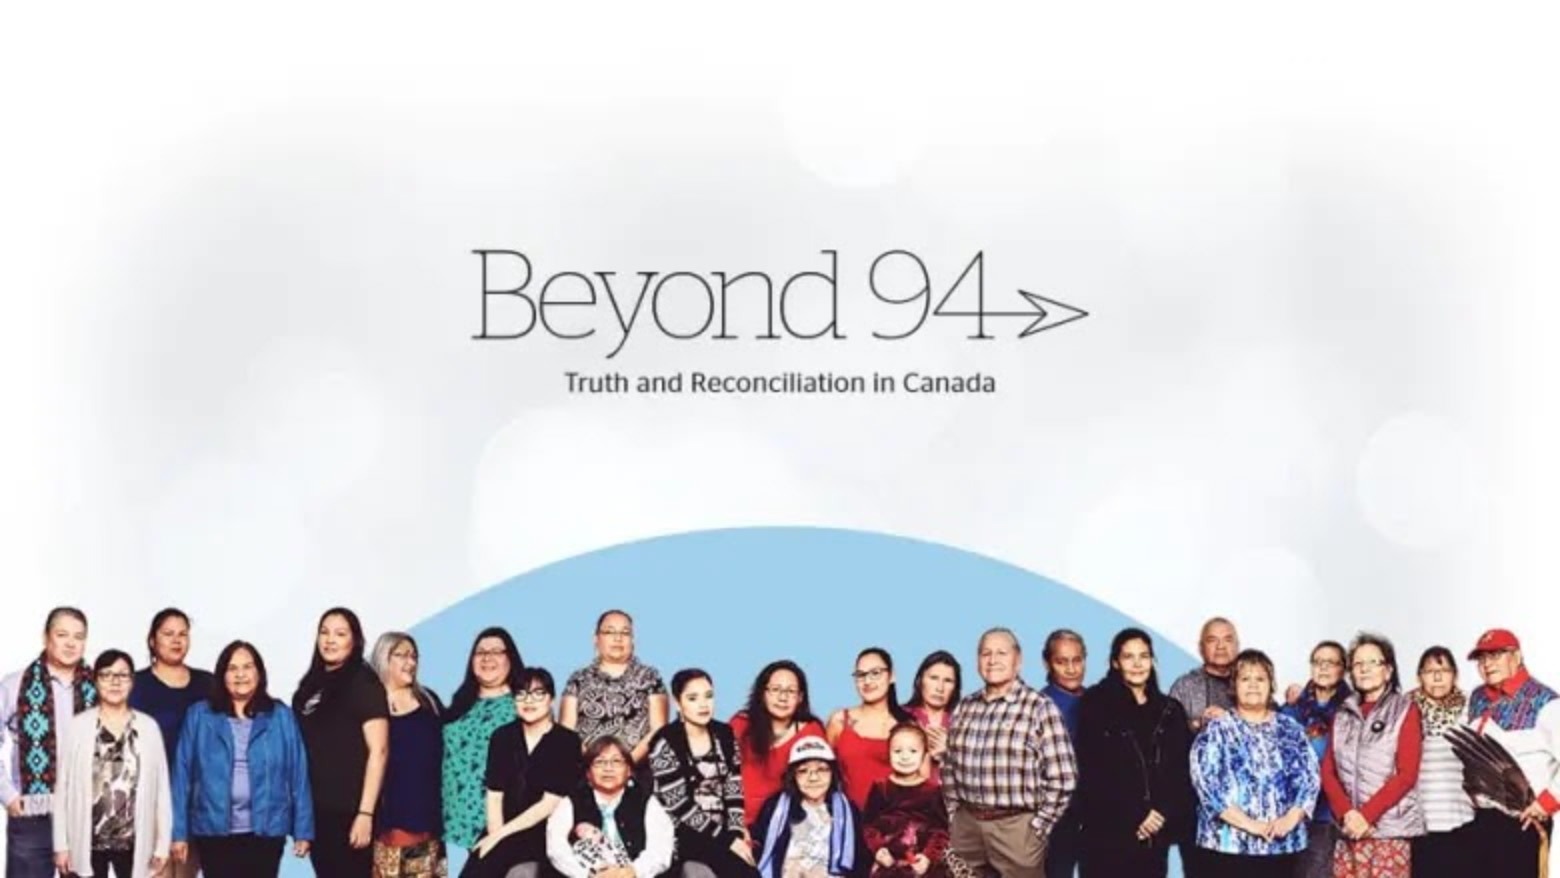 A group of Indigenous individuals are at the bottom of the image. “Beyond 94: Truth and Reconciliation in Canada” is written above them.